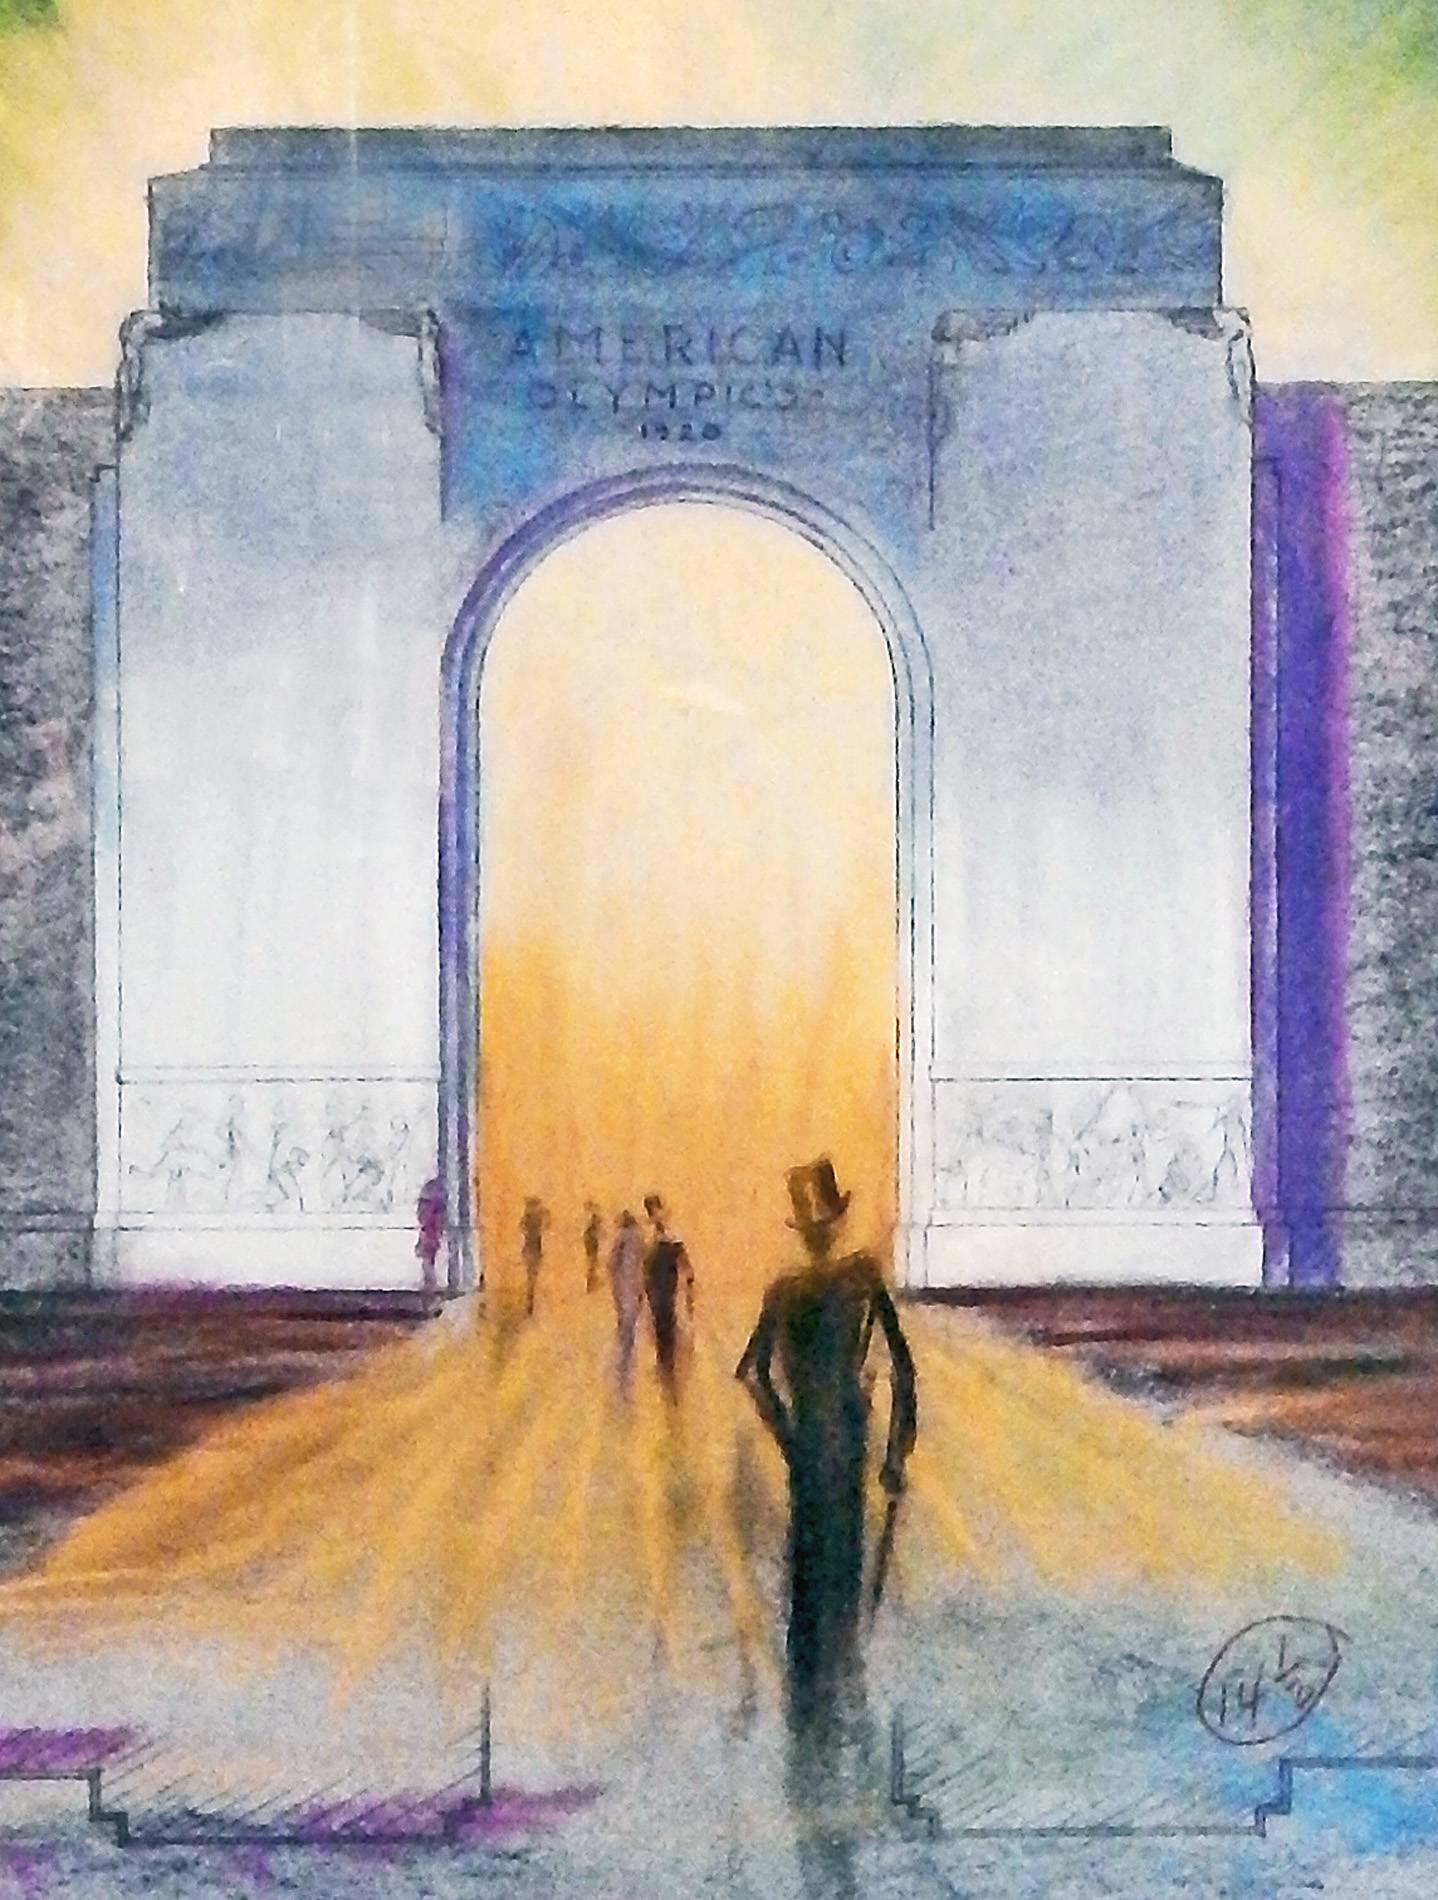 Although the Olympics in 1928 were held in Amsterdam, Lee Seibert drew this vivid and colorful image of the main entrance to the stadium as if it were in America, the sky glowing with a rainbow-hued aureole and the scene attracting sophisticated men